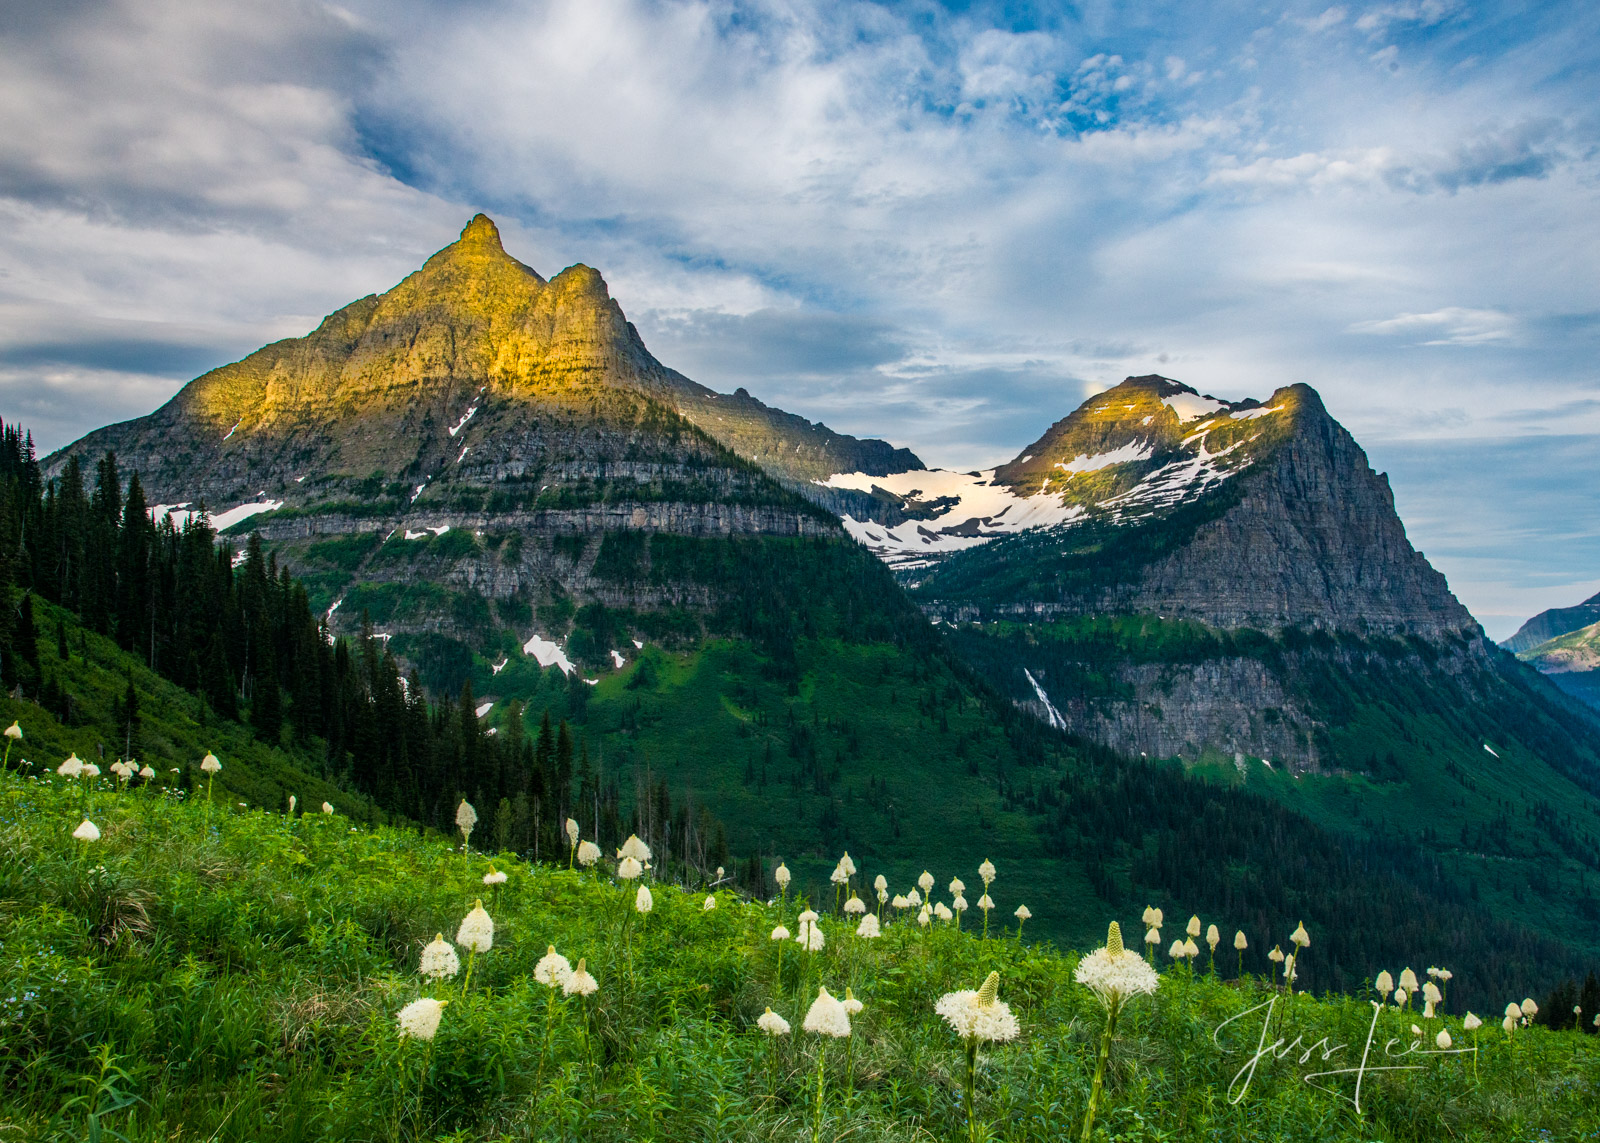 Summer Bear Grass - Picture of Glacier National Park. A fine Art Limited Edition Print of sunset at Glacier. Order yours today...